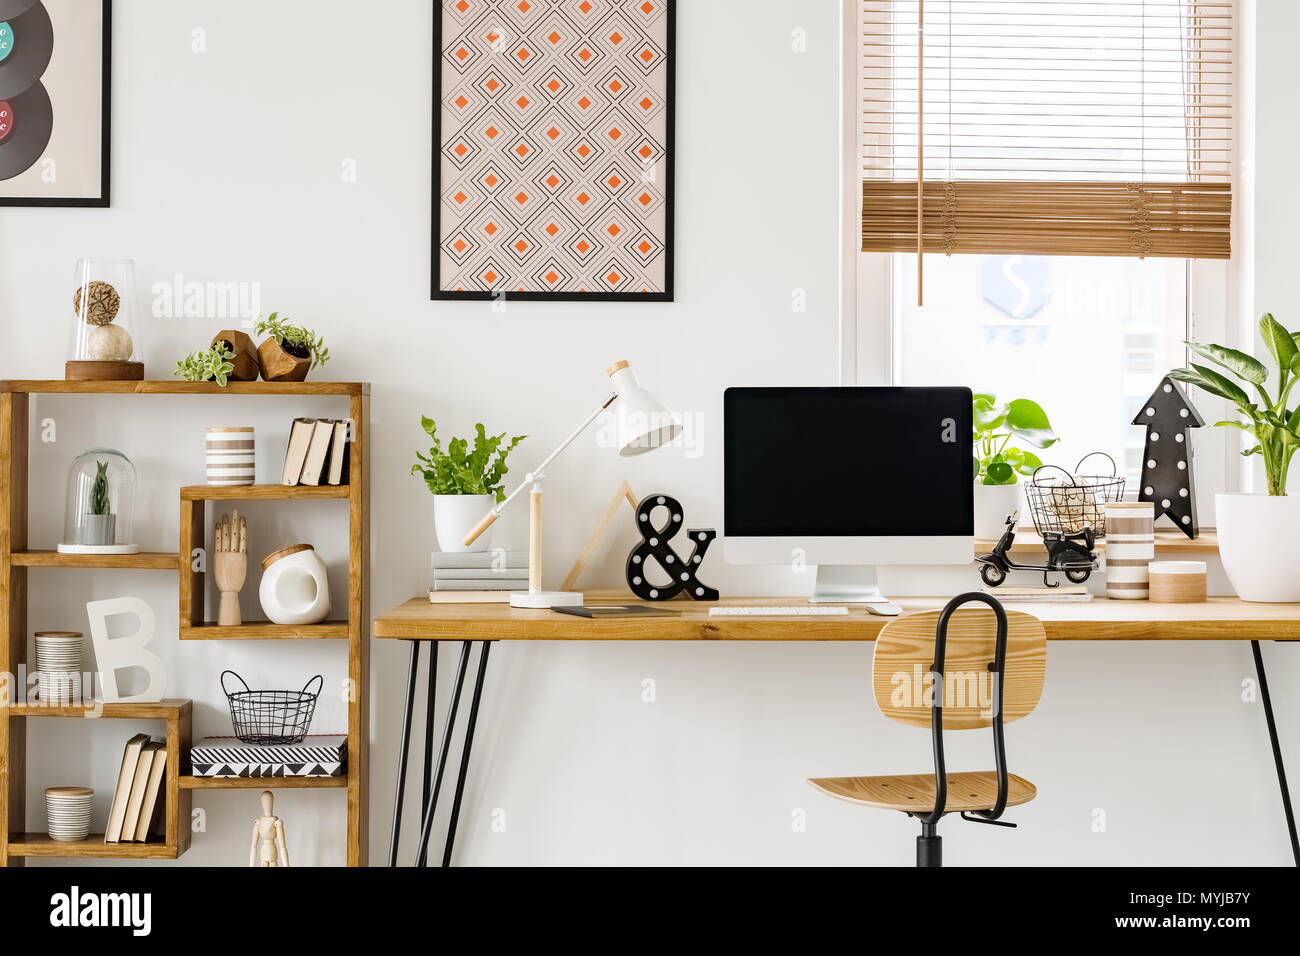 Real photo of a desk with a computer screen, lamp and ornaments standing with a chair next to a rack in a work room with posters on a wall and window  Stock Photo